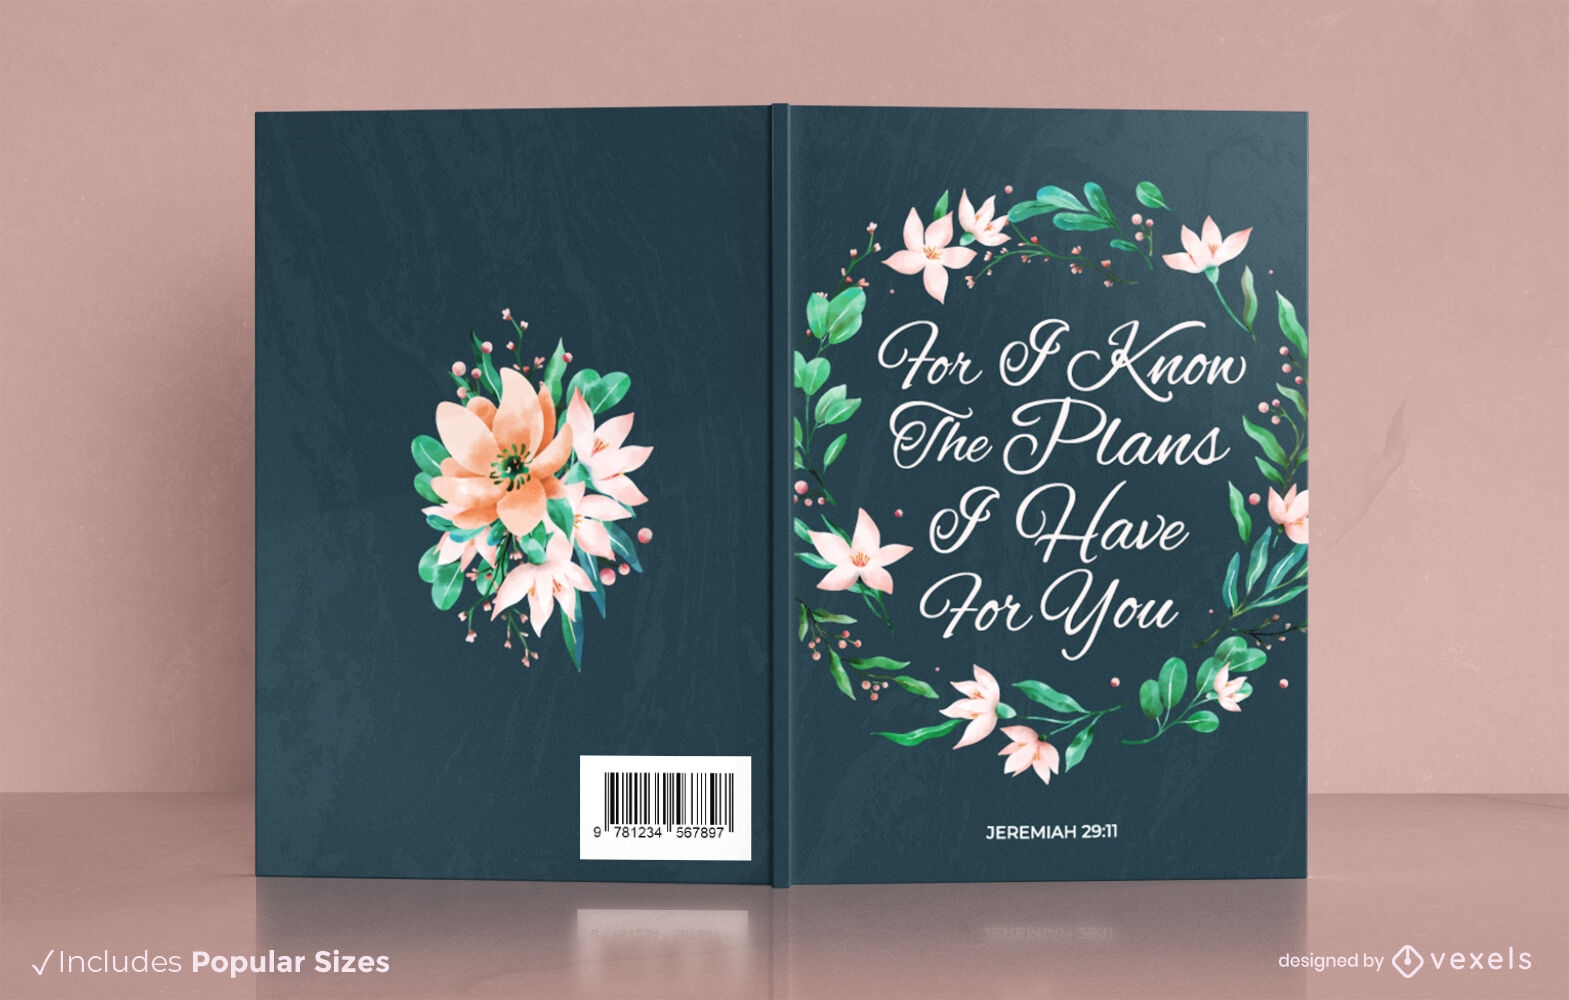 Jeremiah 29 11 quote book cover design